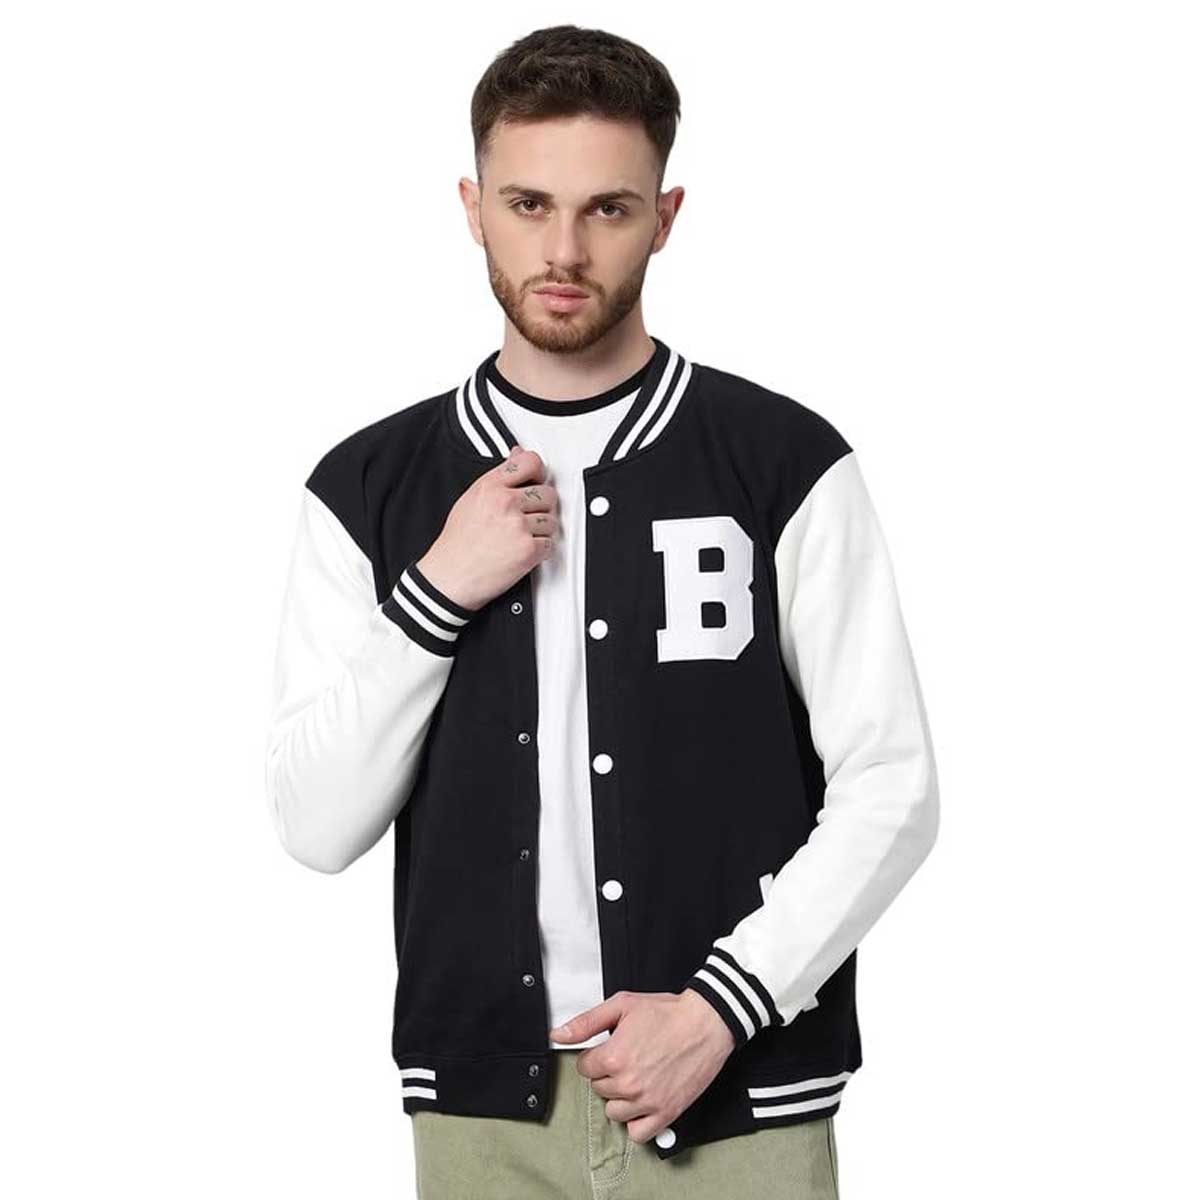 Varsity Jackets Manufacturers in Perm